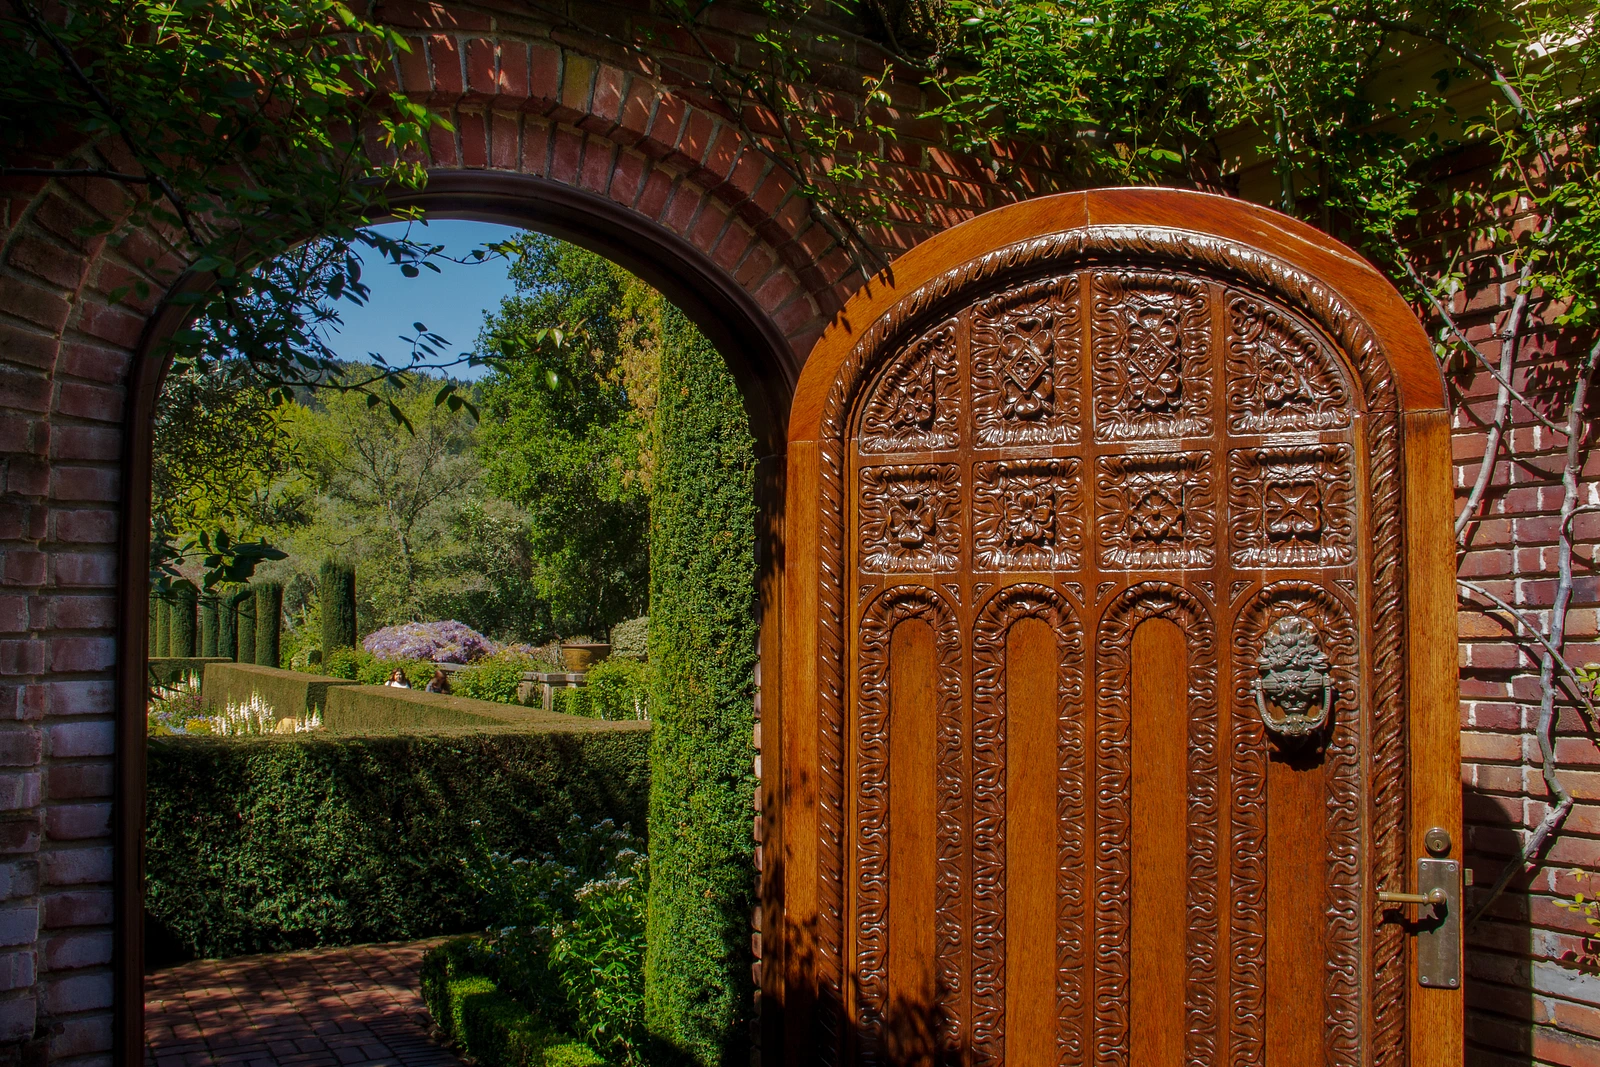 The garden door and the horse pasture at Filoli.